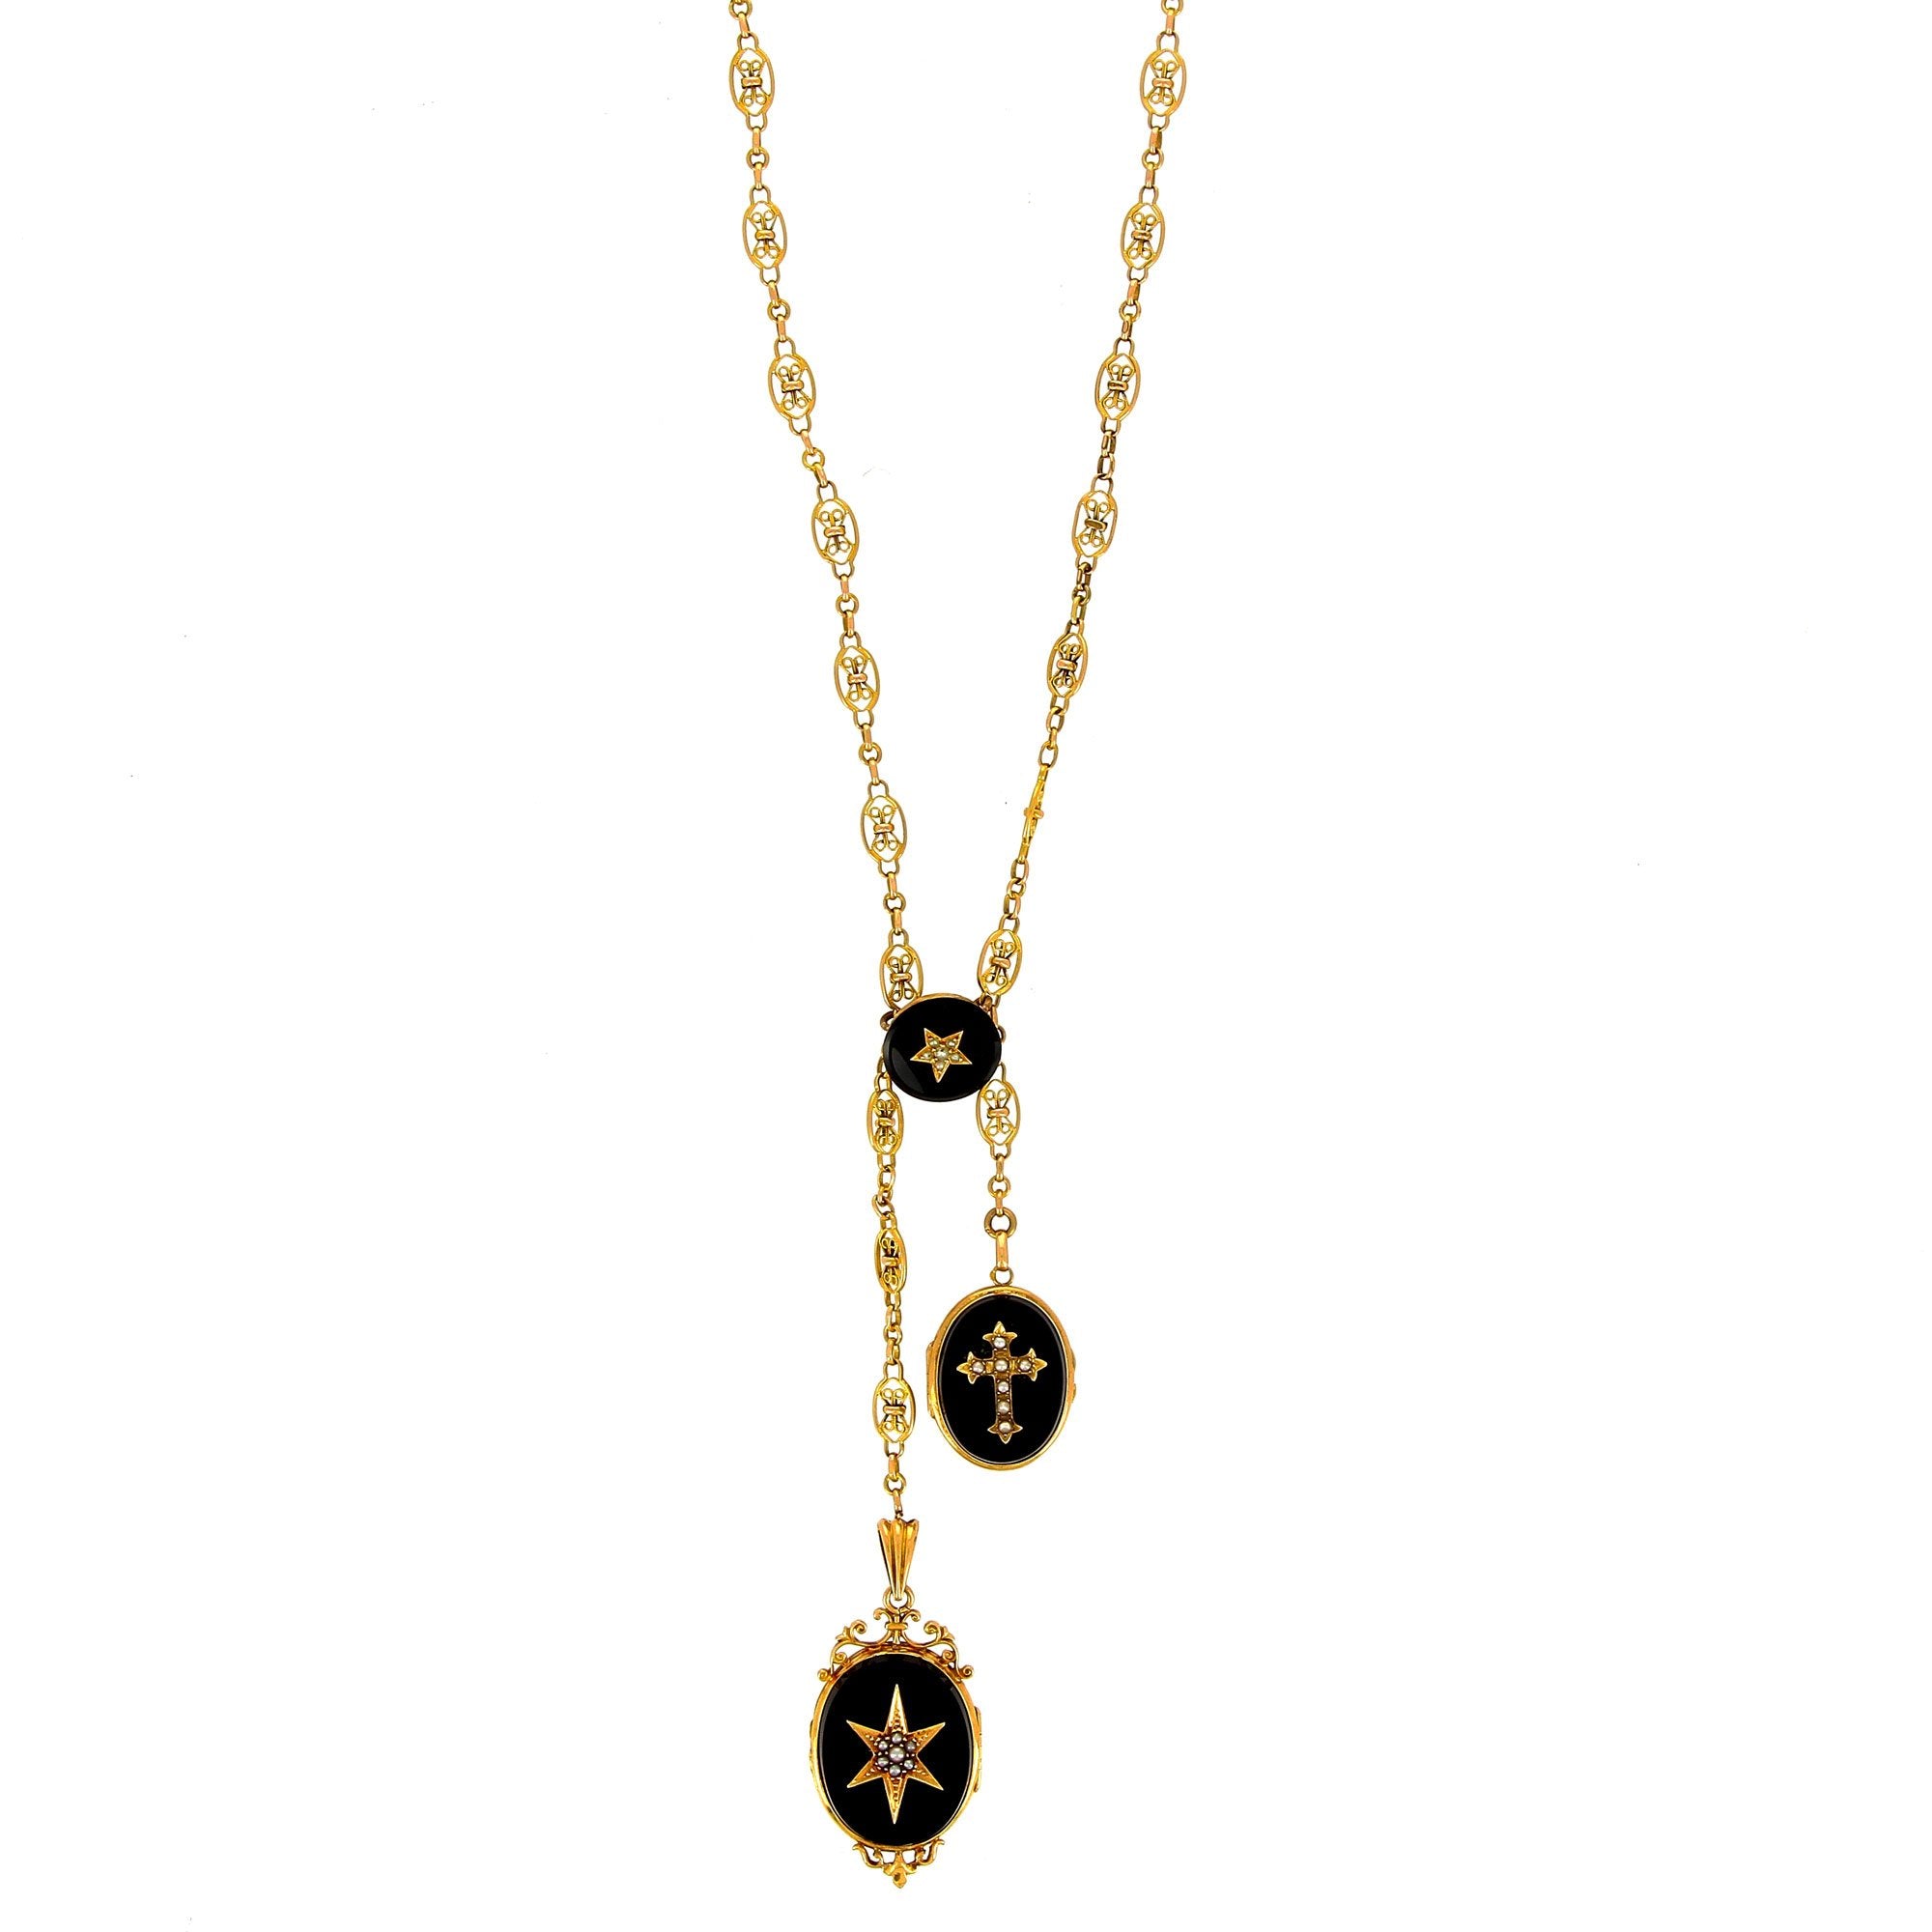 Yellow Gold and Enamel 3 Medals Necklace